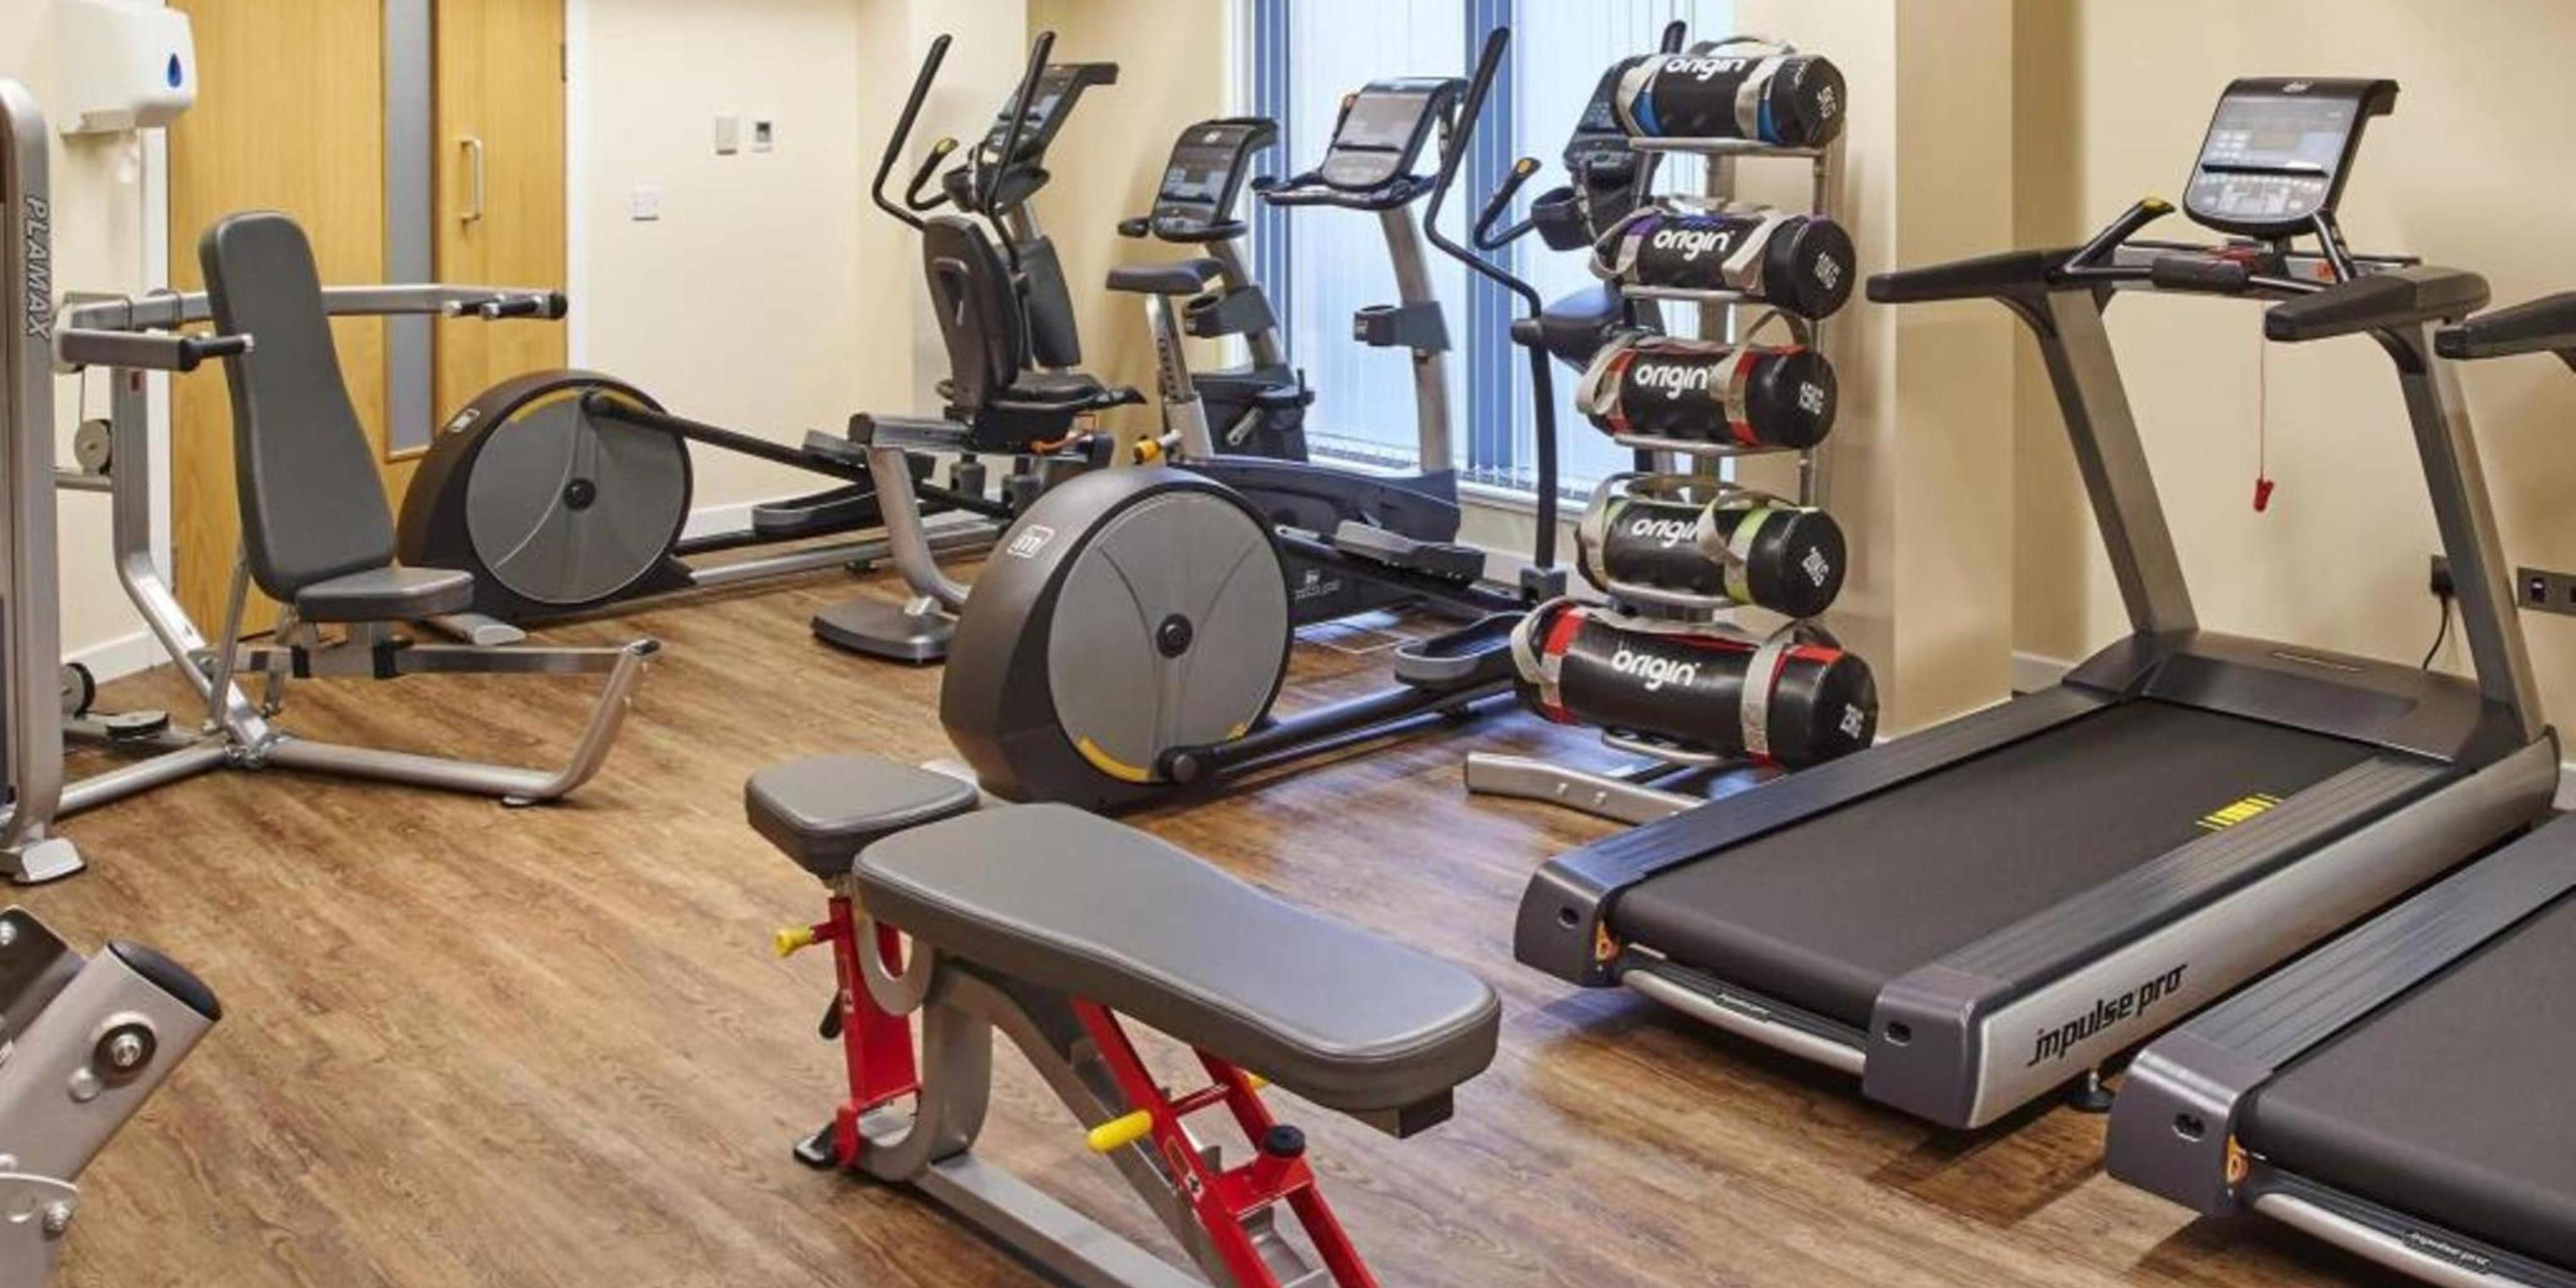 Our newly refurbished fitness centre is conveniently situated within the hotel and offers a fresh and smart way to keep you on your fitness routine during your stay with us.